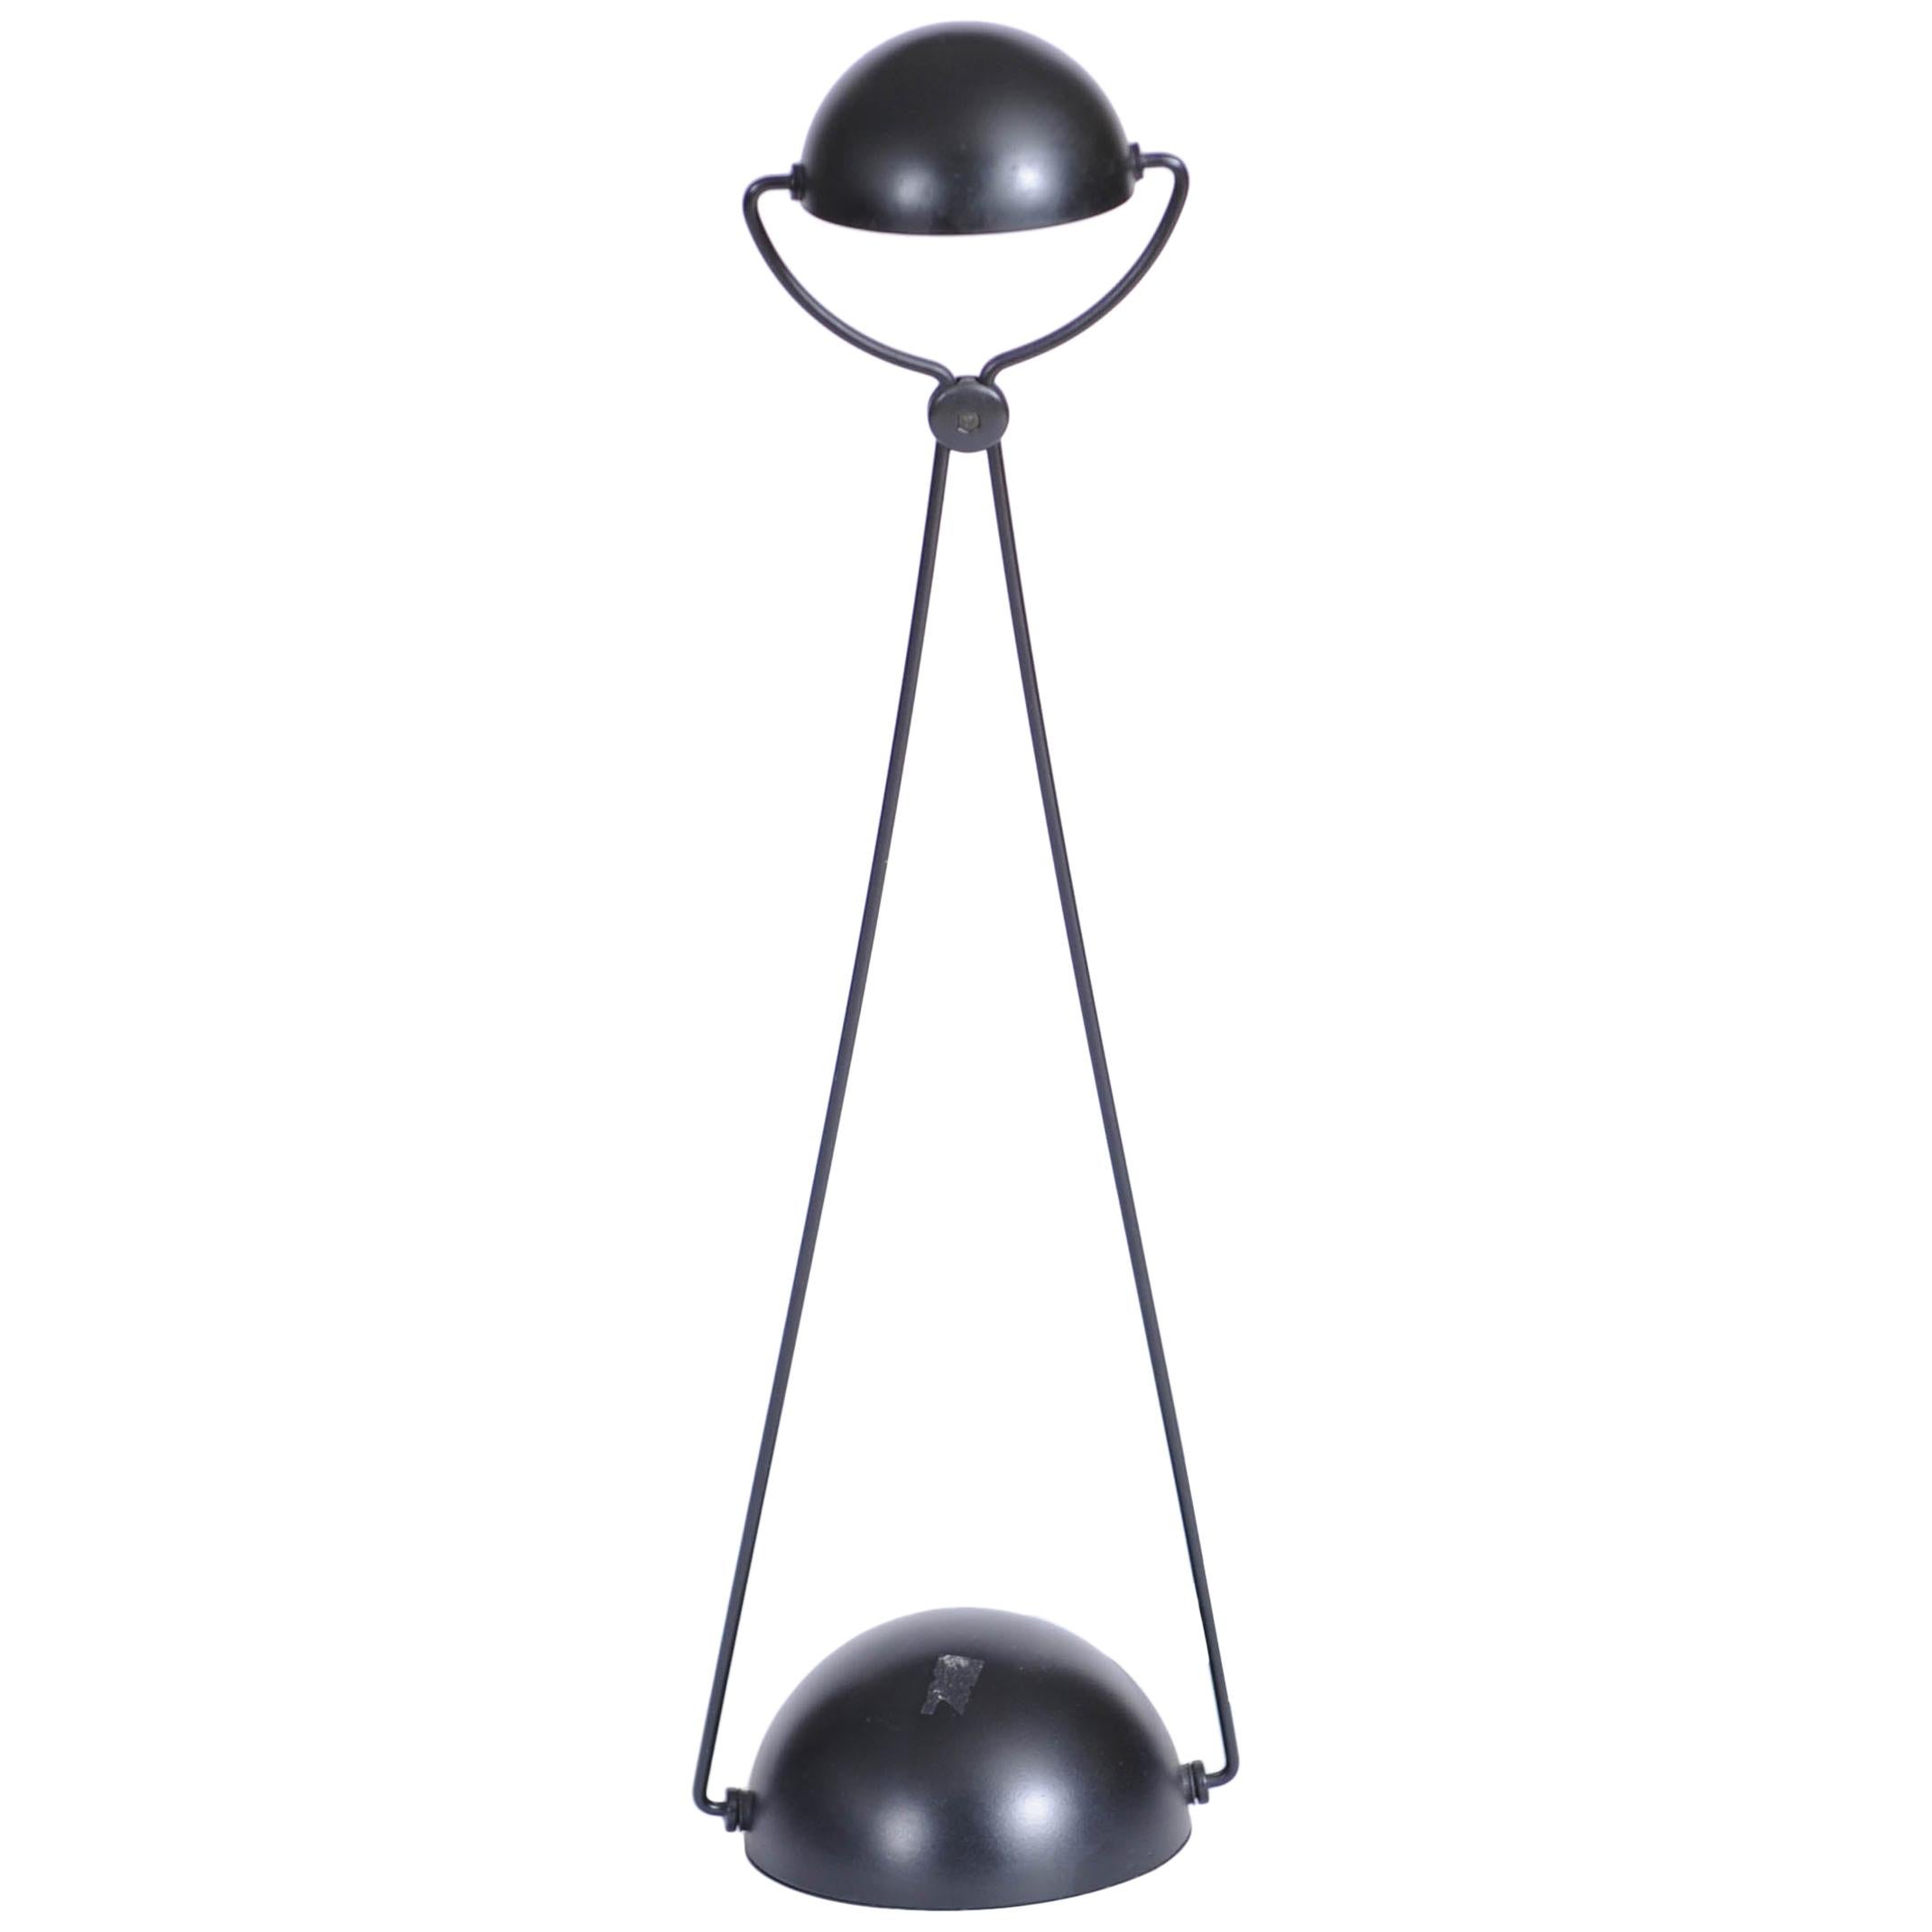 Postmodern Table or Desk Lamp Meridiana by Paolo Piva for Stefano Cevoli For Sale